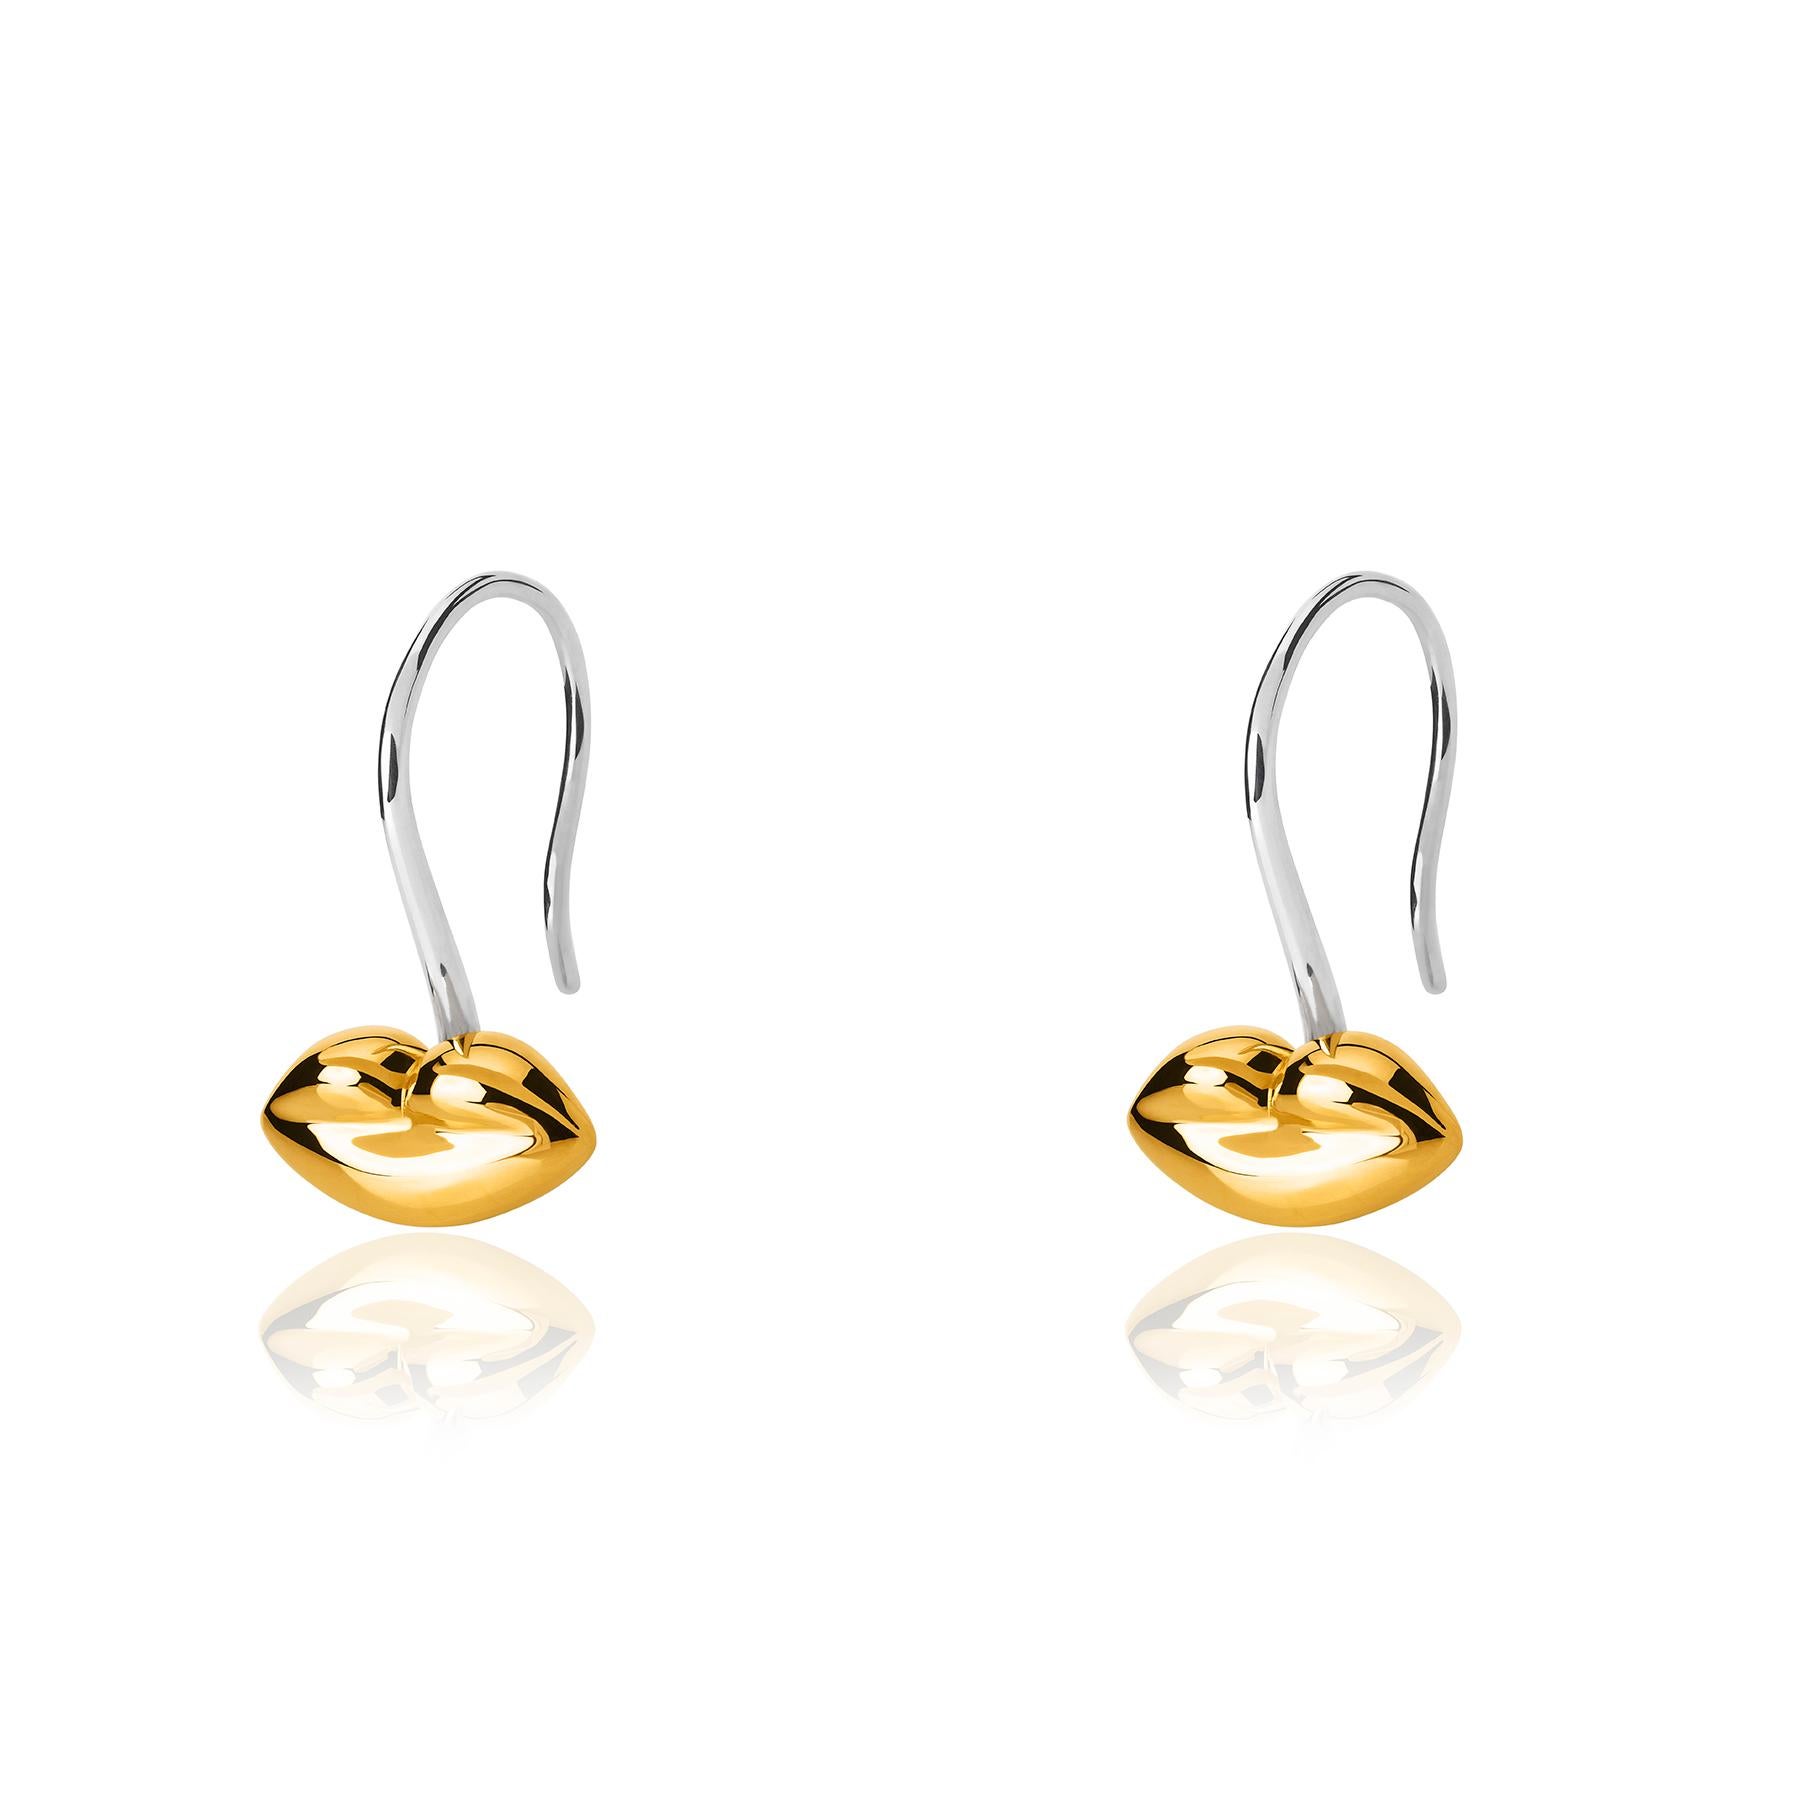 The Bésame Solitaire Vermeil Earrings from the Bésame collection by TANE are made in sterling silver. In each piece, a kiss gently sculpted in TANE's vision hangs from a drop-shaped hook, the best way to give a kiss that lasts forever. Handmade in